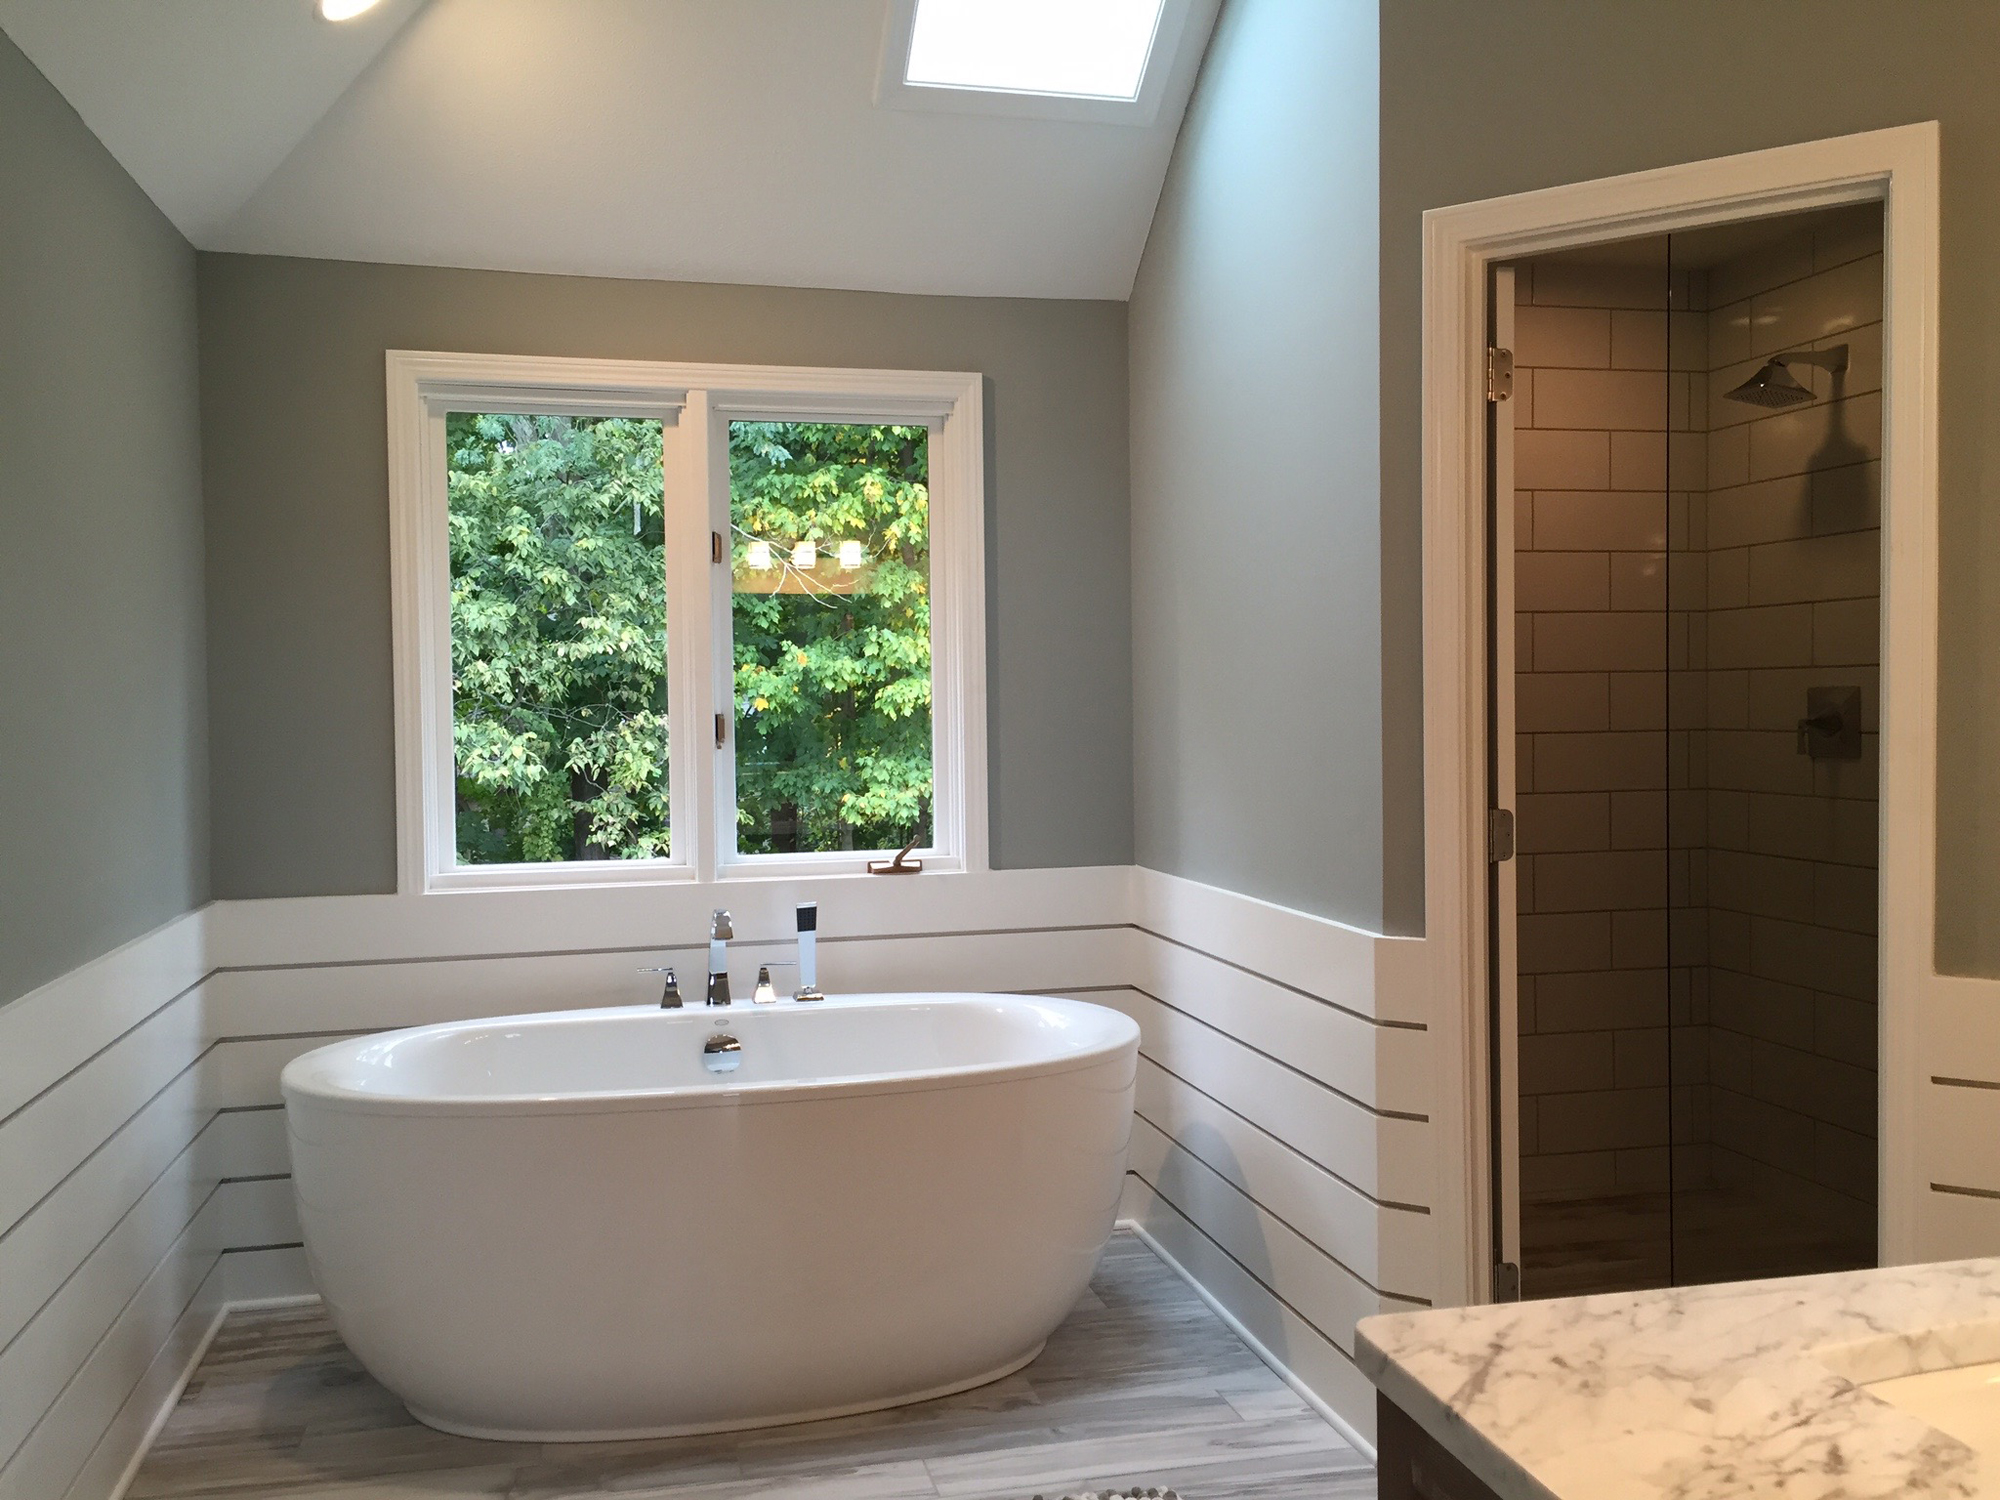 Freestanding tubs are growing in popularity because of their elegant and airy look. (Submitted photo)